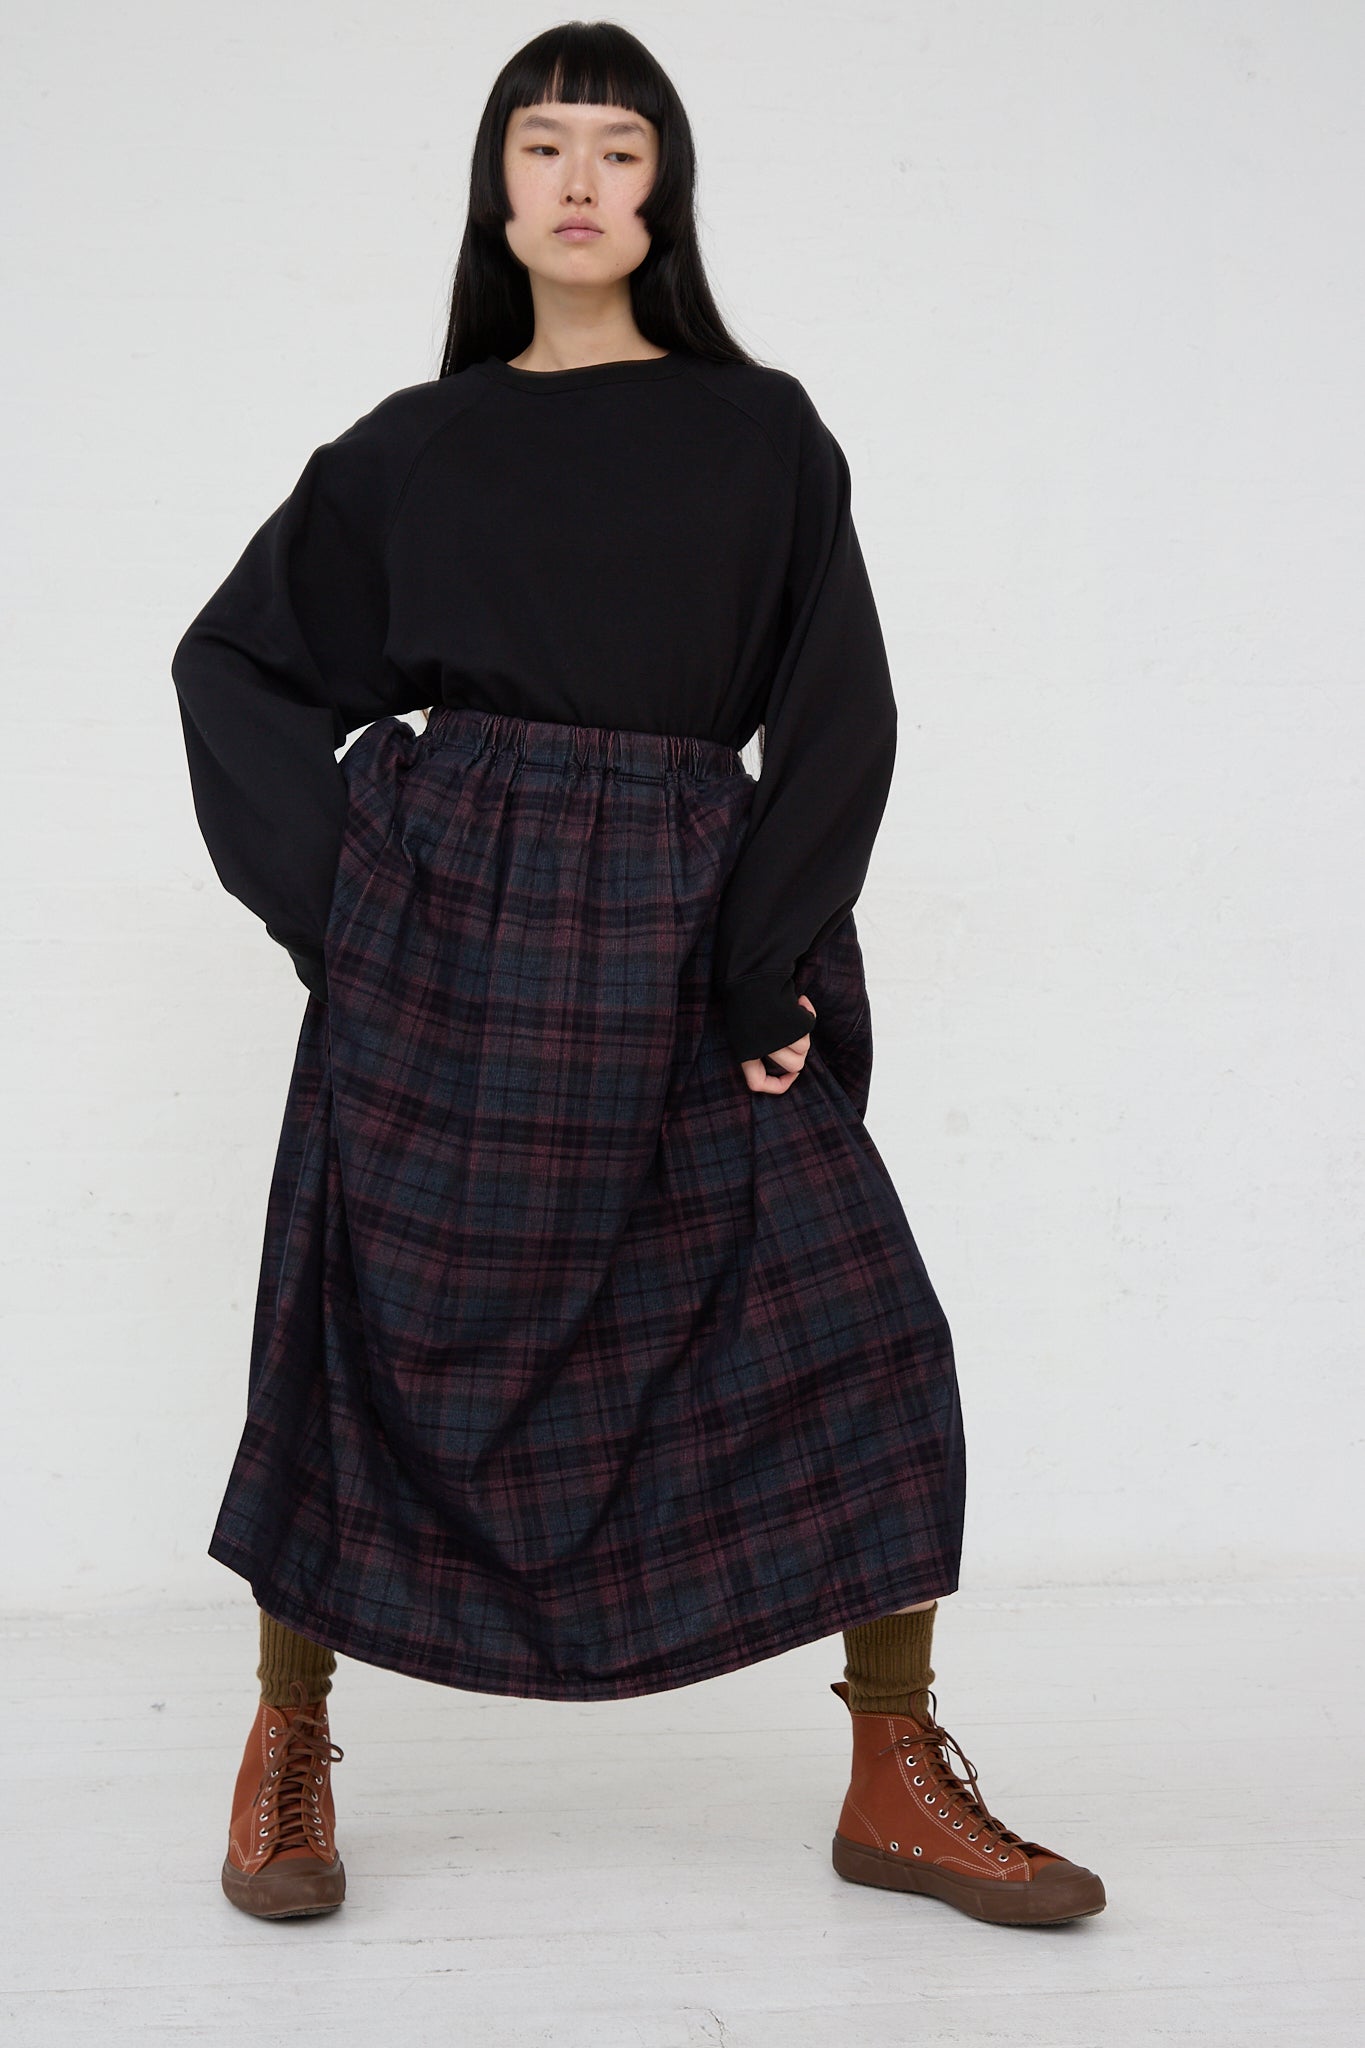 A woman wearing a black sweater and an Ichi Woven Cotton Skirt in Navy with an elasticated waist.